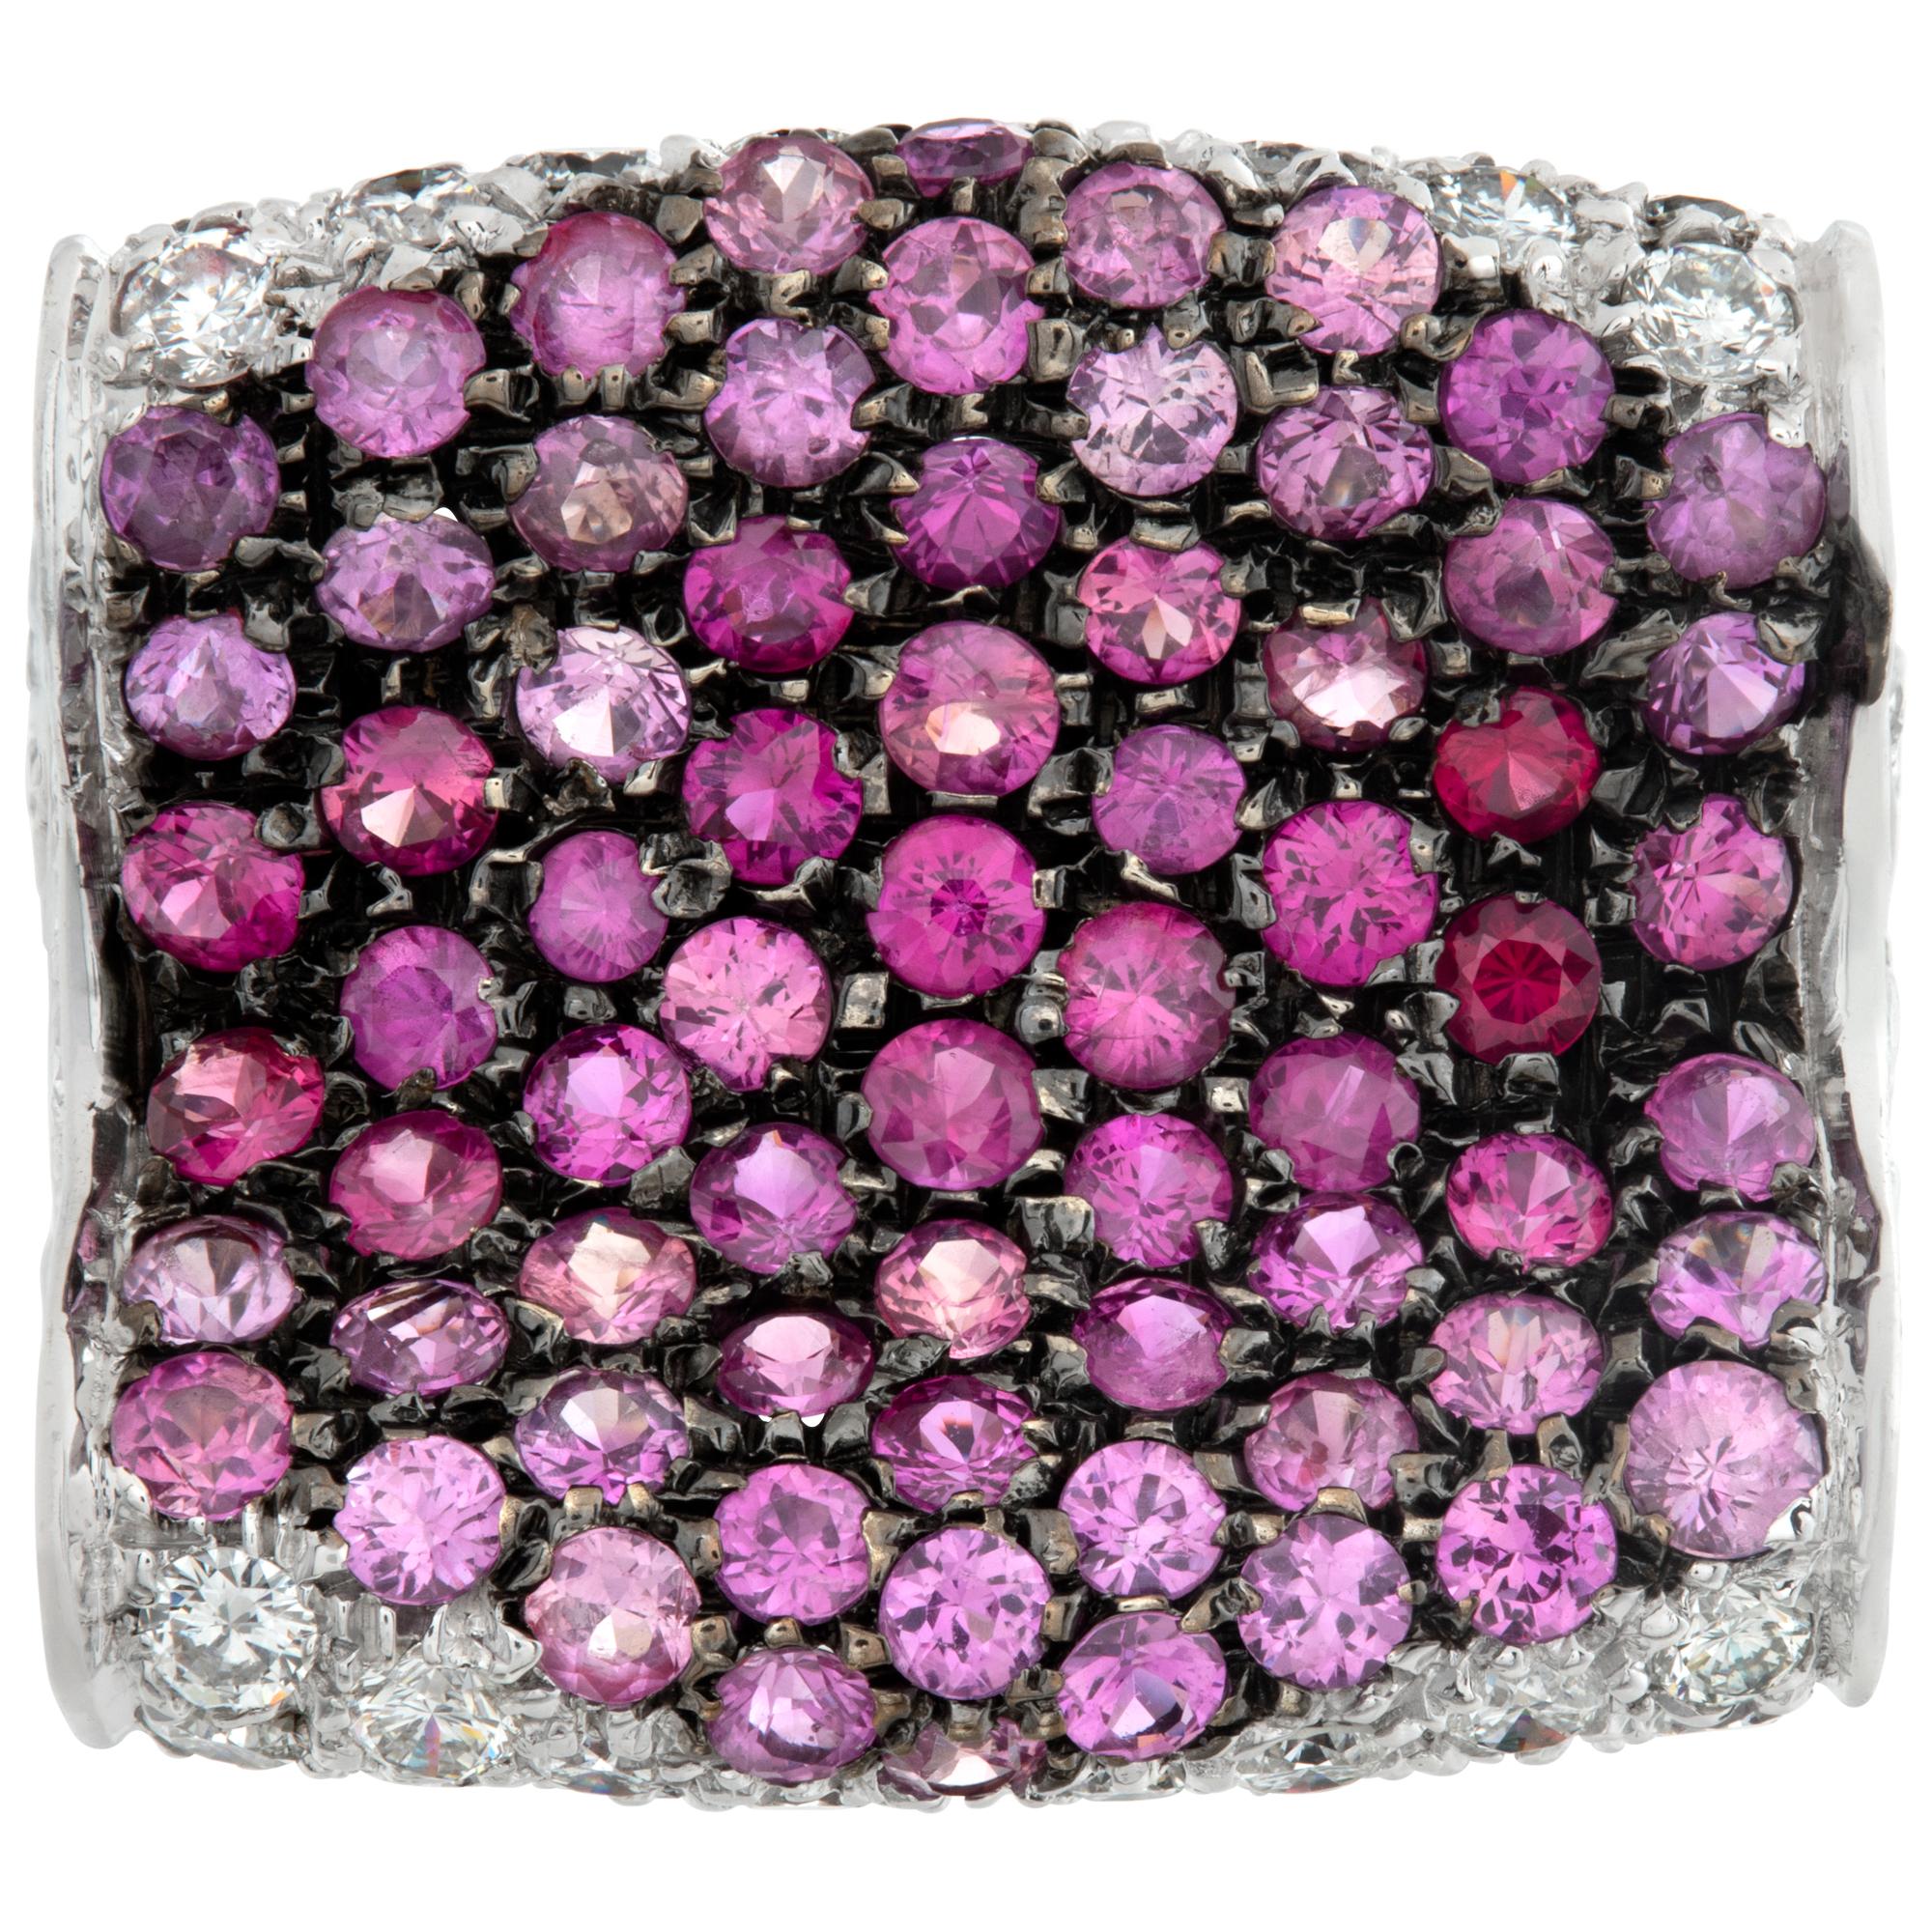 Glamorous 18k white gold pave ring with approximately 2 carats in round brilliant cut diamonds and approximately 2 carats in brilliant cut pink sapphires. Size 5.5, head 20mm wide 18mm long, shank 5mm.This Diamond/Sapphires ring is currently size